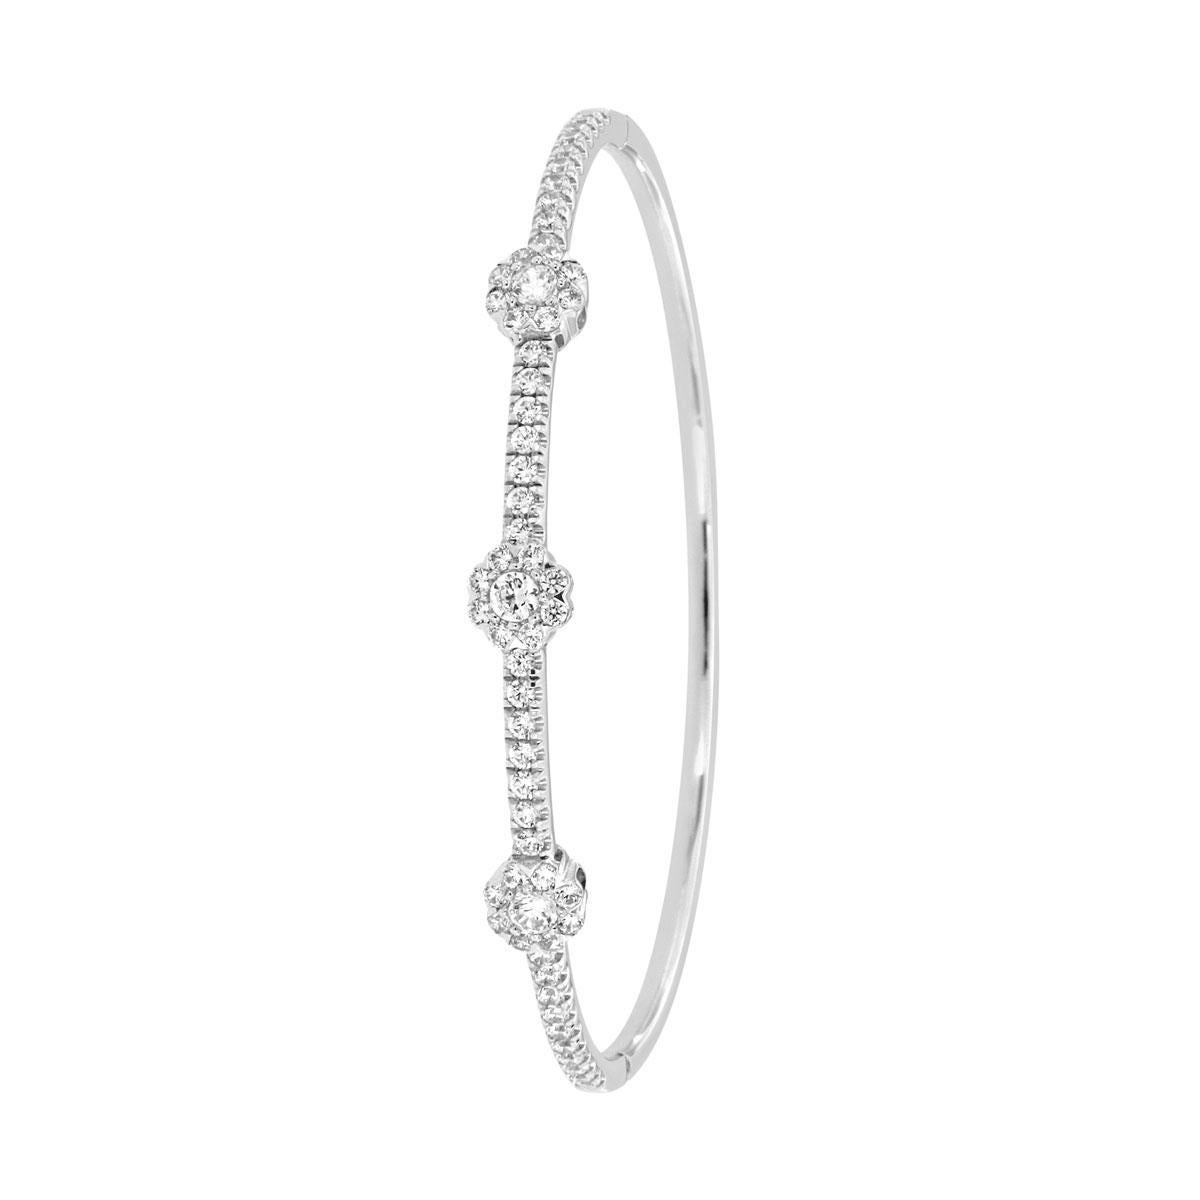 This stunning bangle features round brilliant diamonds micro-prong-set to maximize its brilliance. Experience the difference!

Product details: 

Center Gemstone Type: NATURAL DIAMOND
Center Gemstone Color: WHITE
Center Gemstone Shape: ROUND
Center